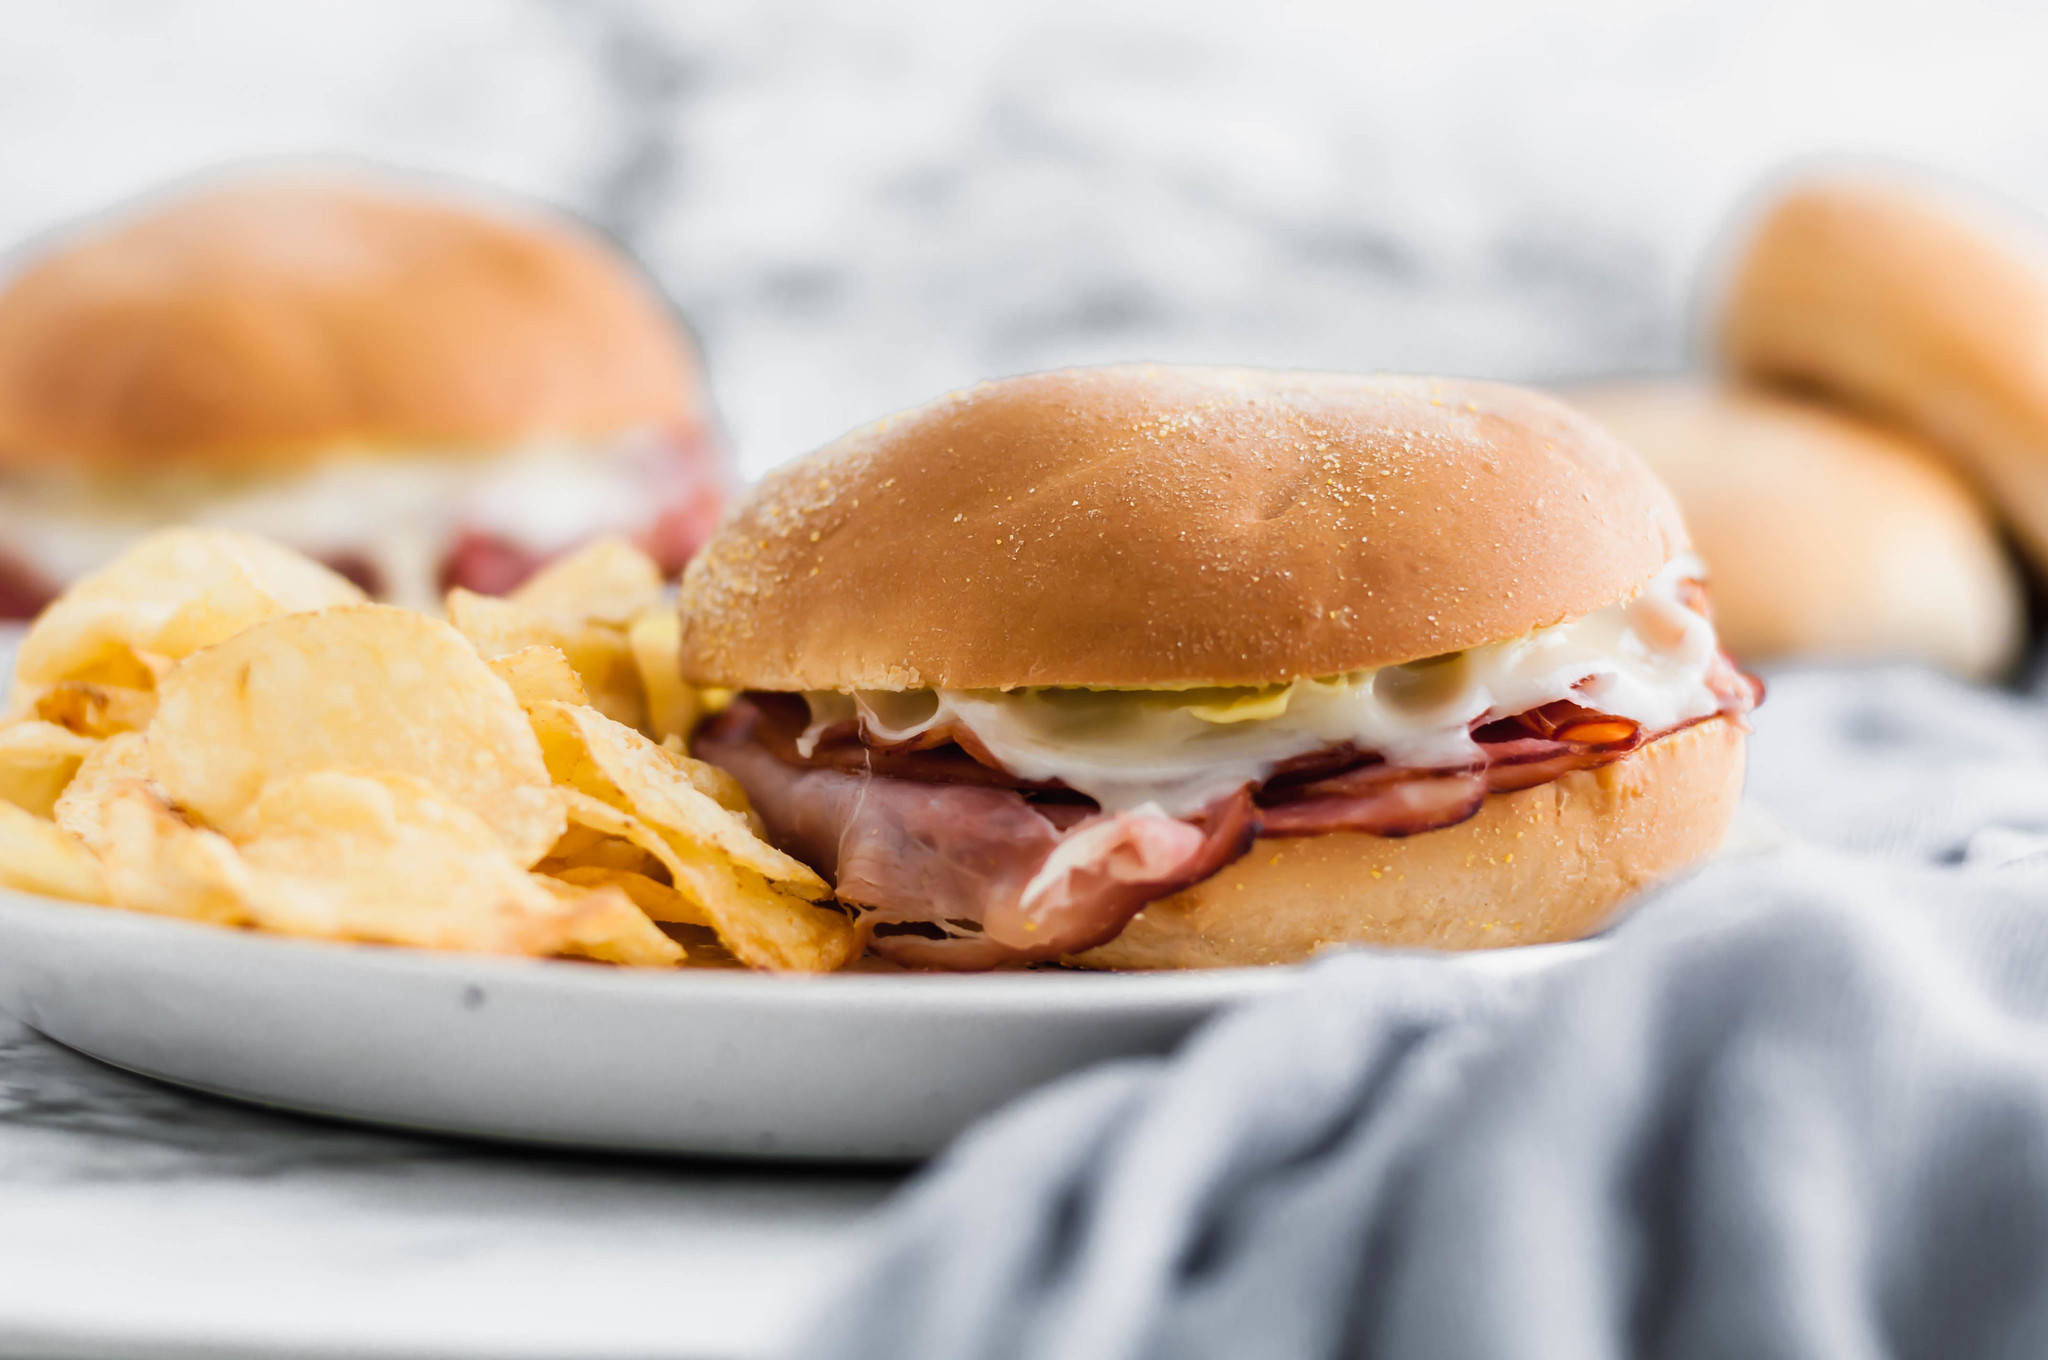 Need an easy lunch or weeknight meal? These Hot Ham and Cheese Sandwiches are the perfect solution. Shaved deli ham (honey ham is my favorite) with melted swiss cheese and a yummy sauce.